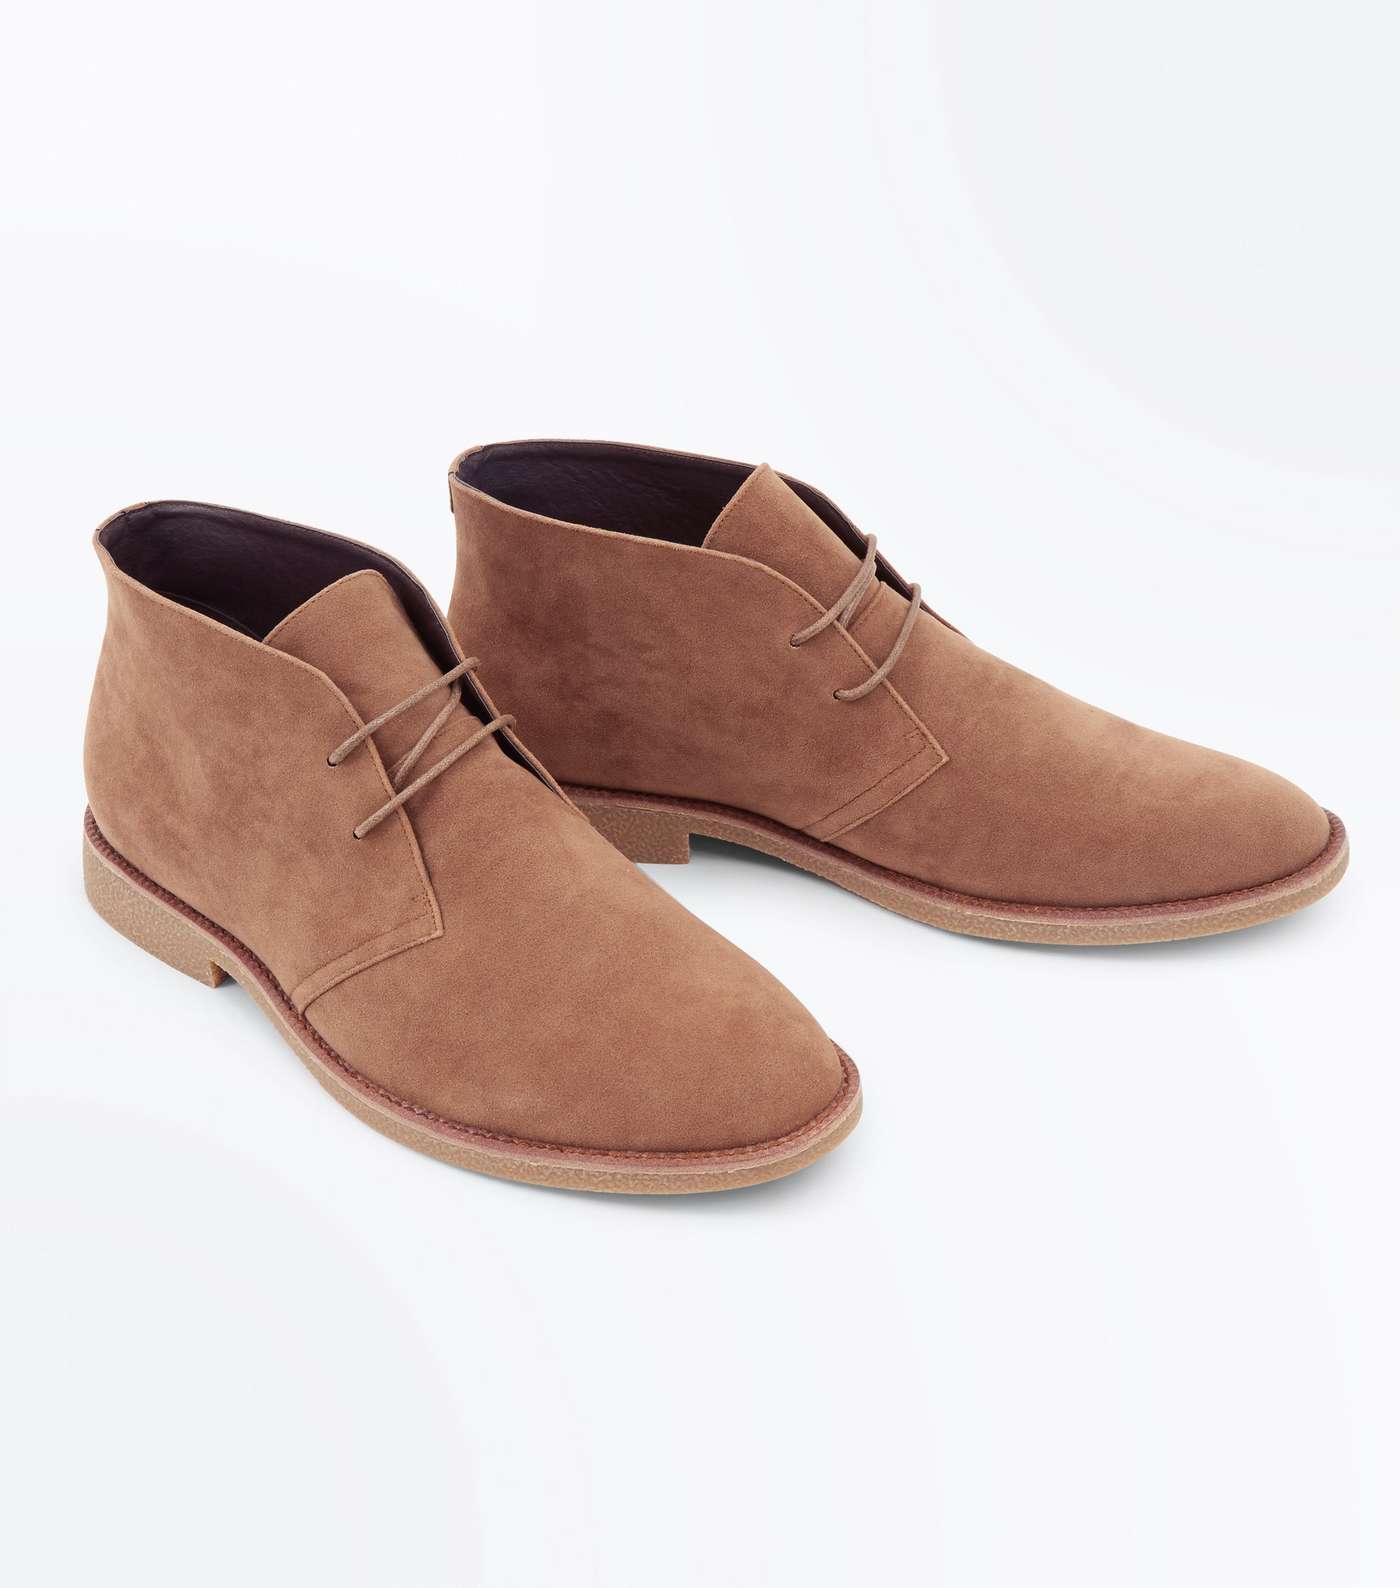 Stone Faux Suede Desert Boots Image 4